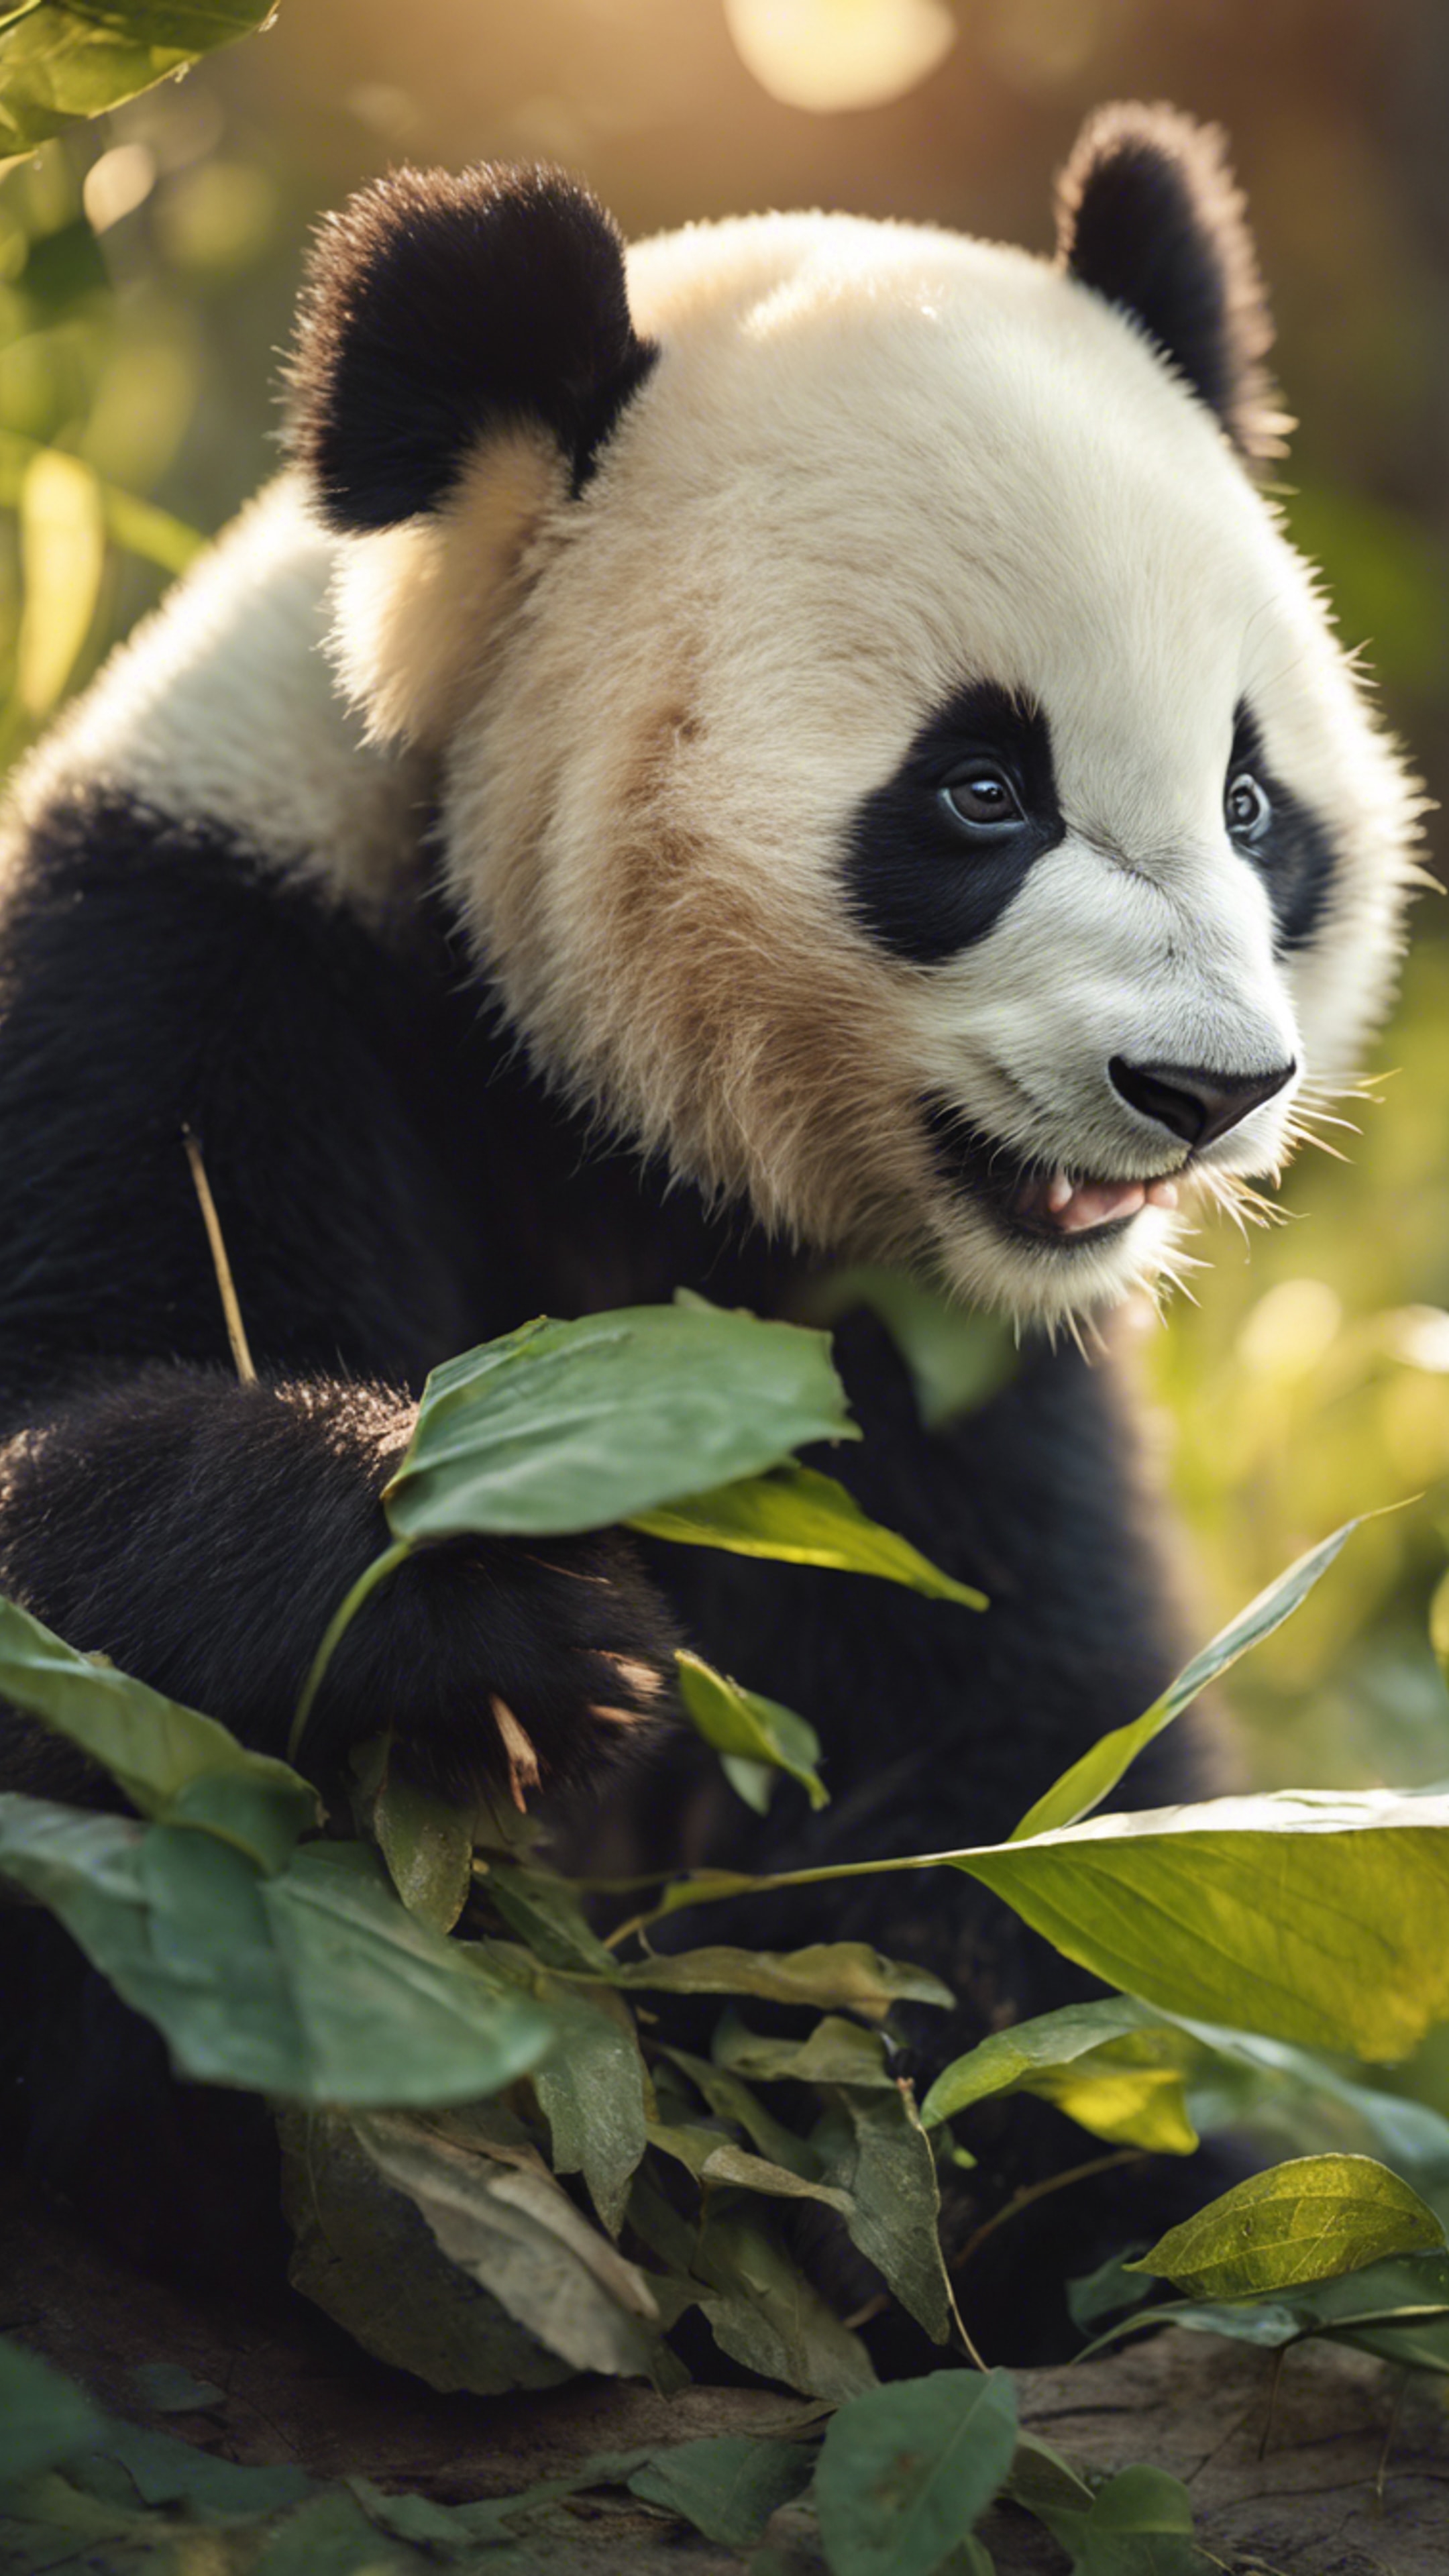 A young panda bear adorably nibbling on a leaf in the soft glow of morning light. Fond d'écran[df98dc8ca776441d85bc]